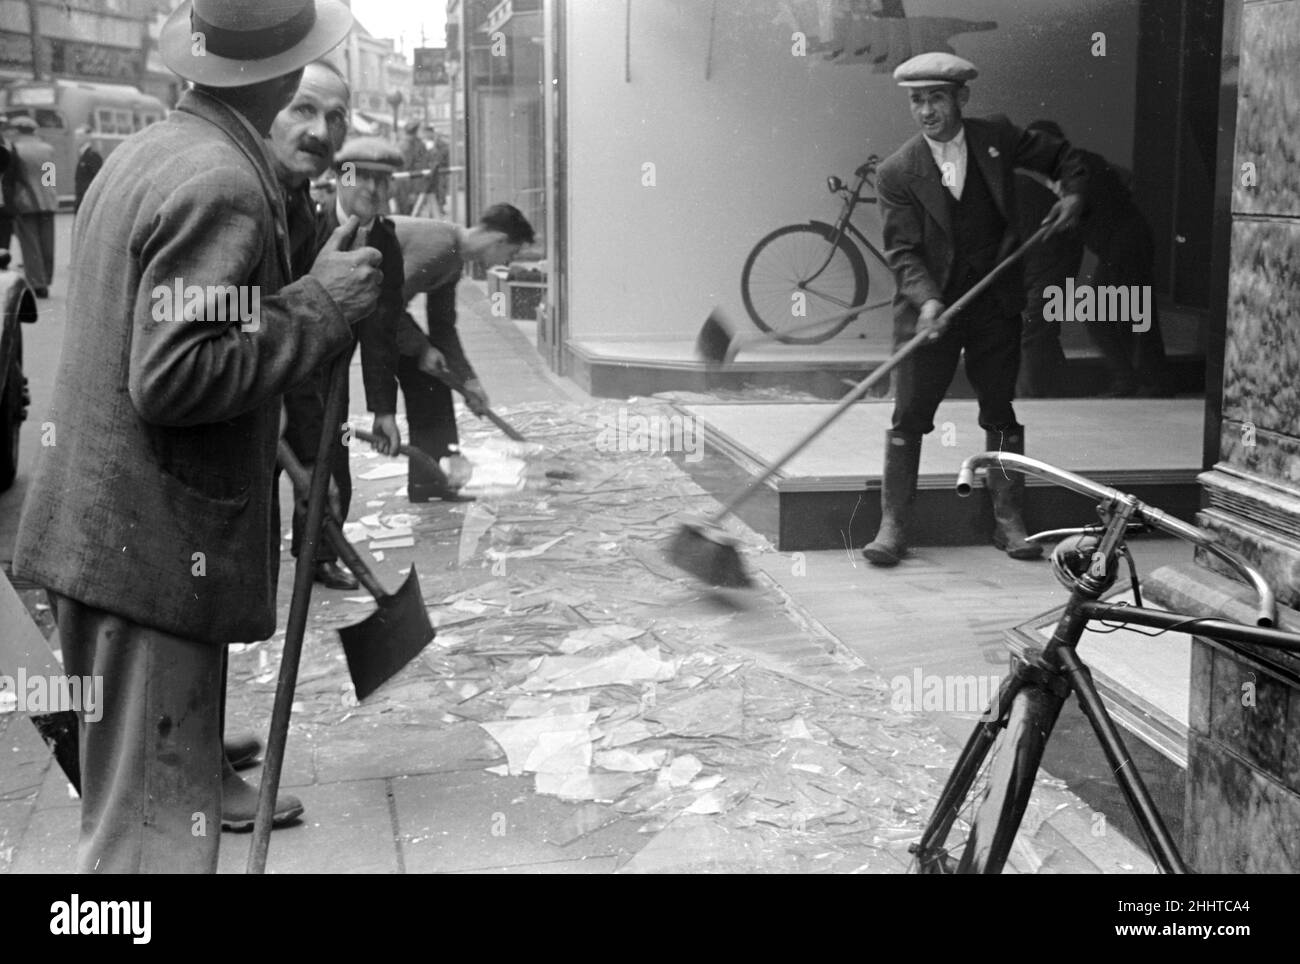 Alfieri. Air Raid damage, Kingston, London. Sweeping up broken glass from a damaged shop. August 25th 1940. L159 Stock Photo